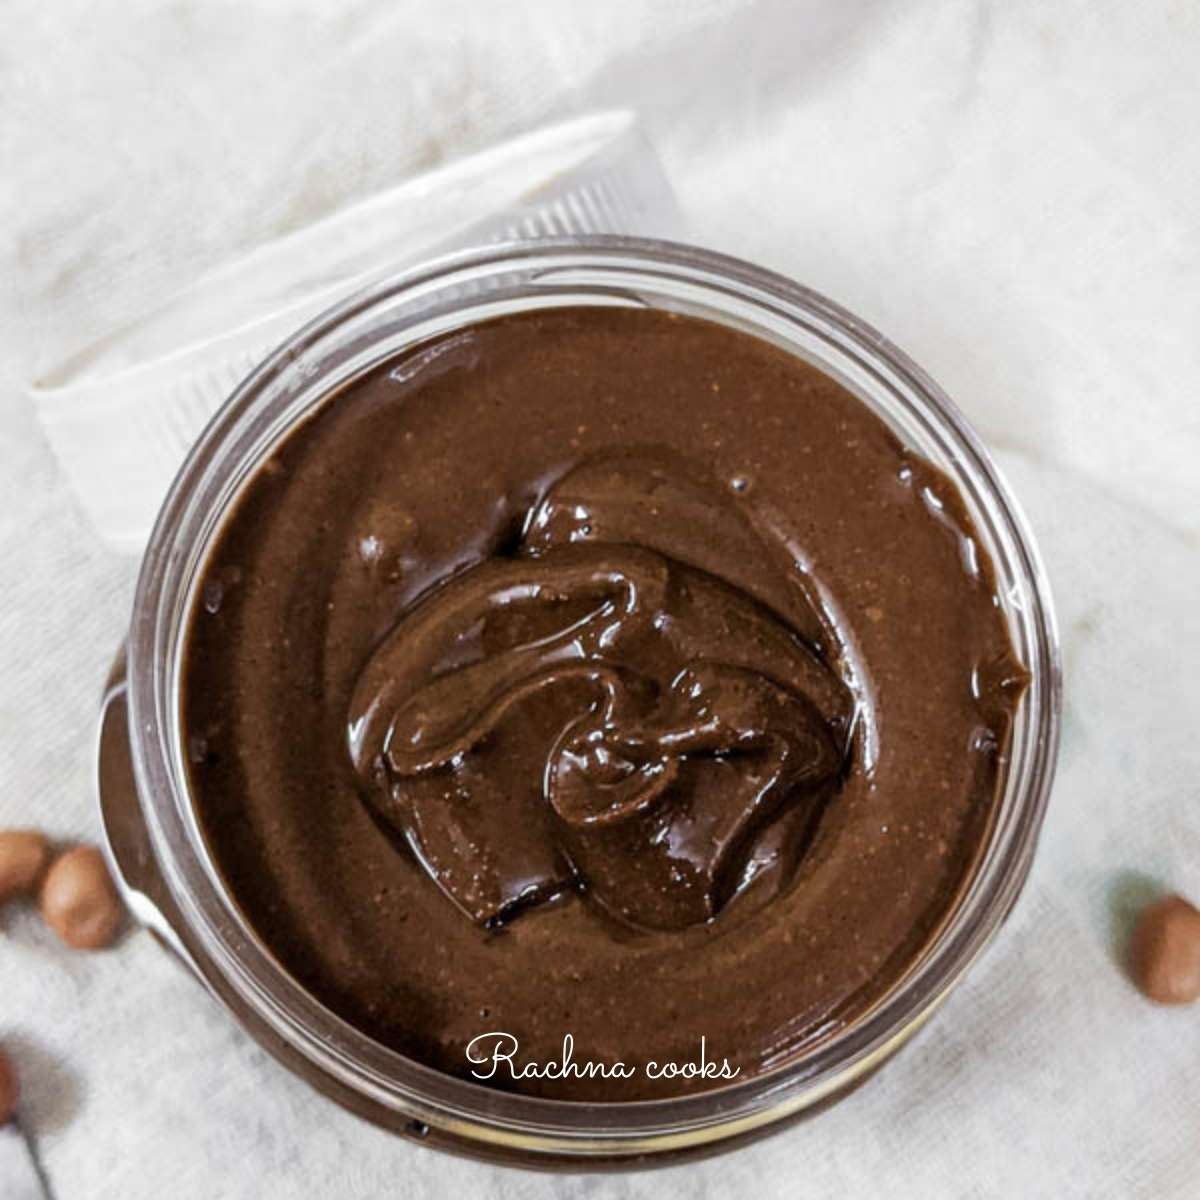 Top shot of open jar of shiny chocolate peanut butter